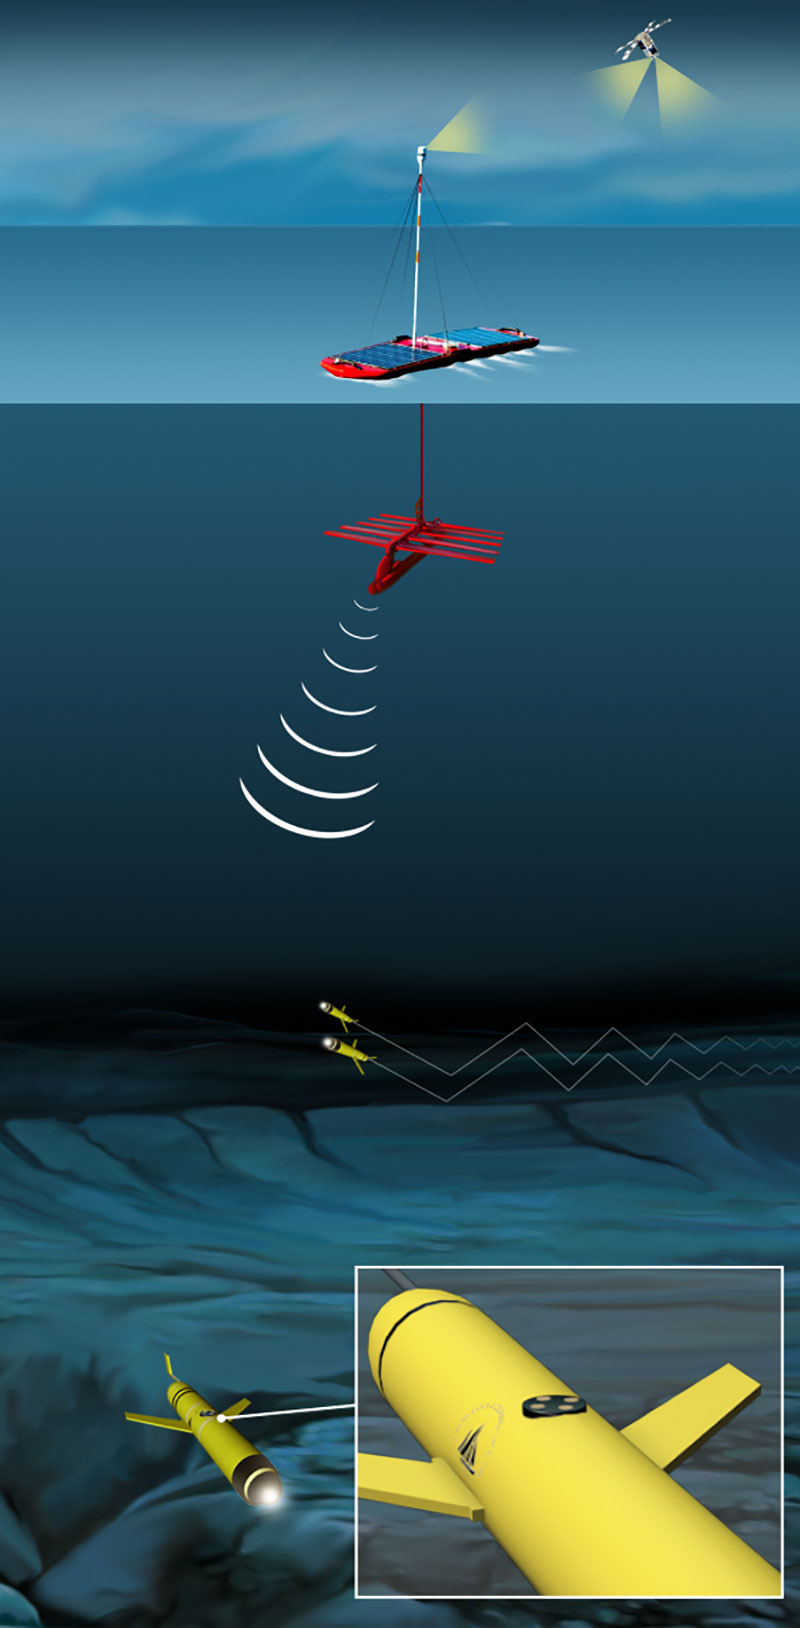 Illustration of a glider equipped with a one-way-travel-time inverted ultra-short-baseline tranducer, 'listening' for a single from the surface to determine the glider's location.